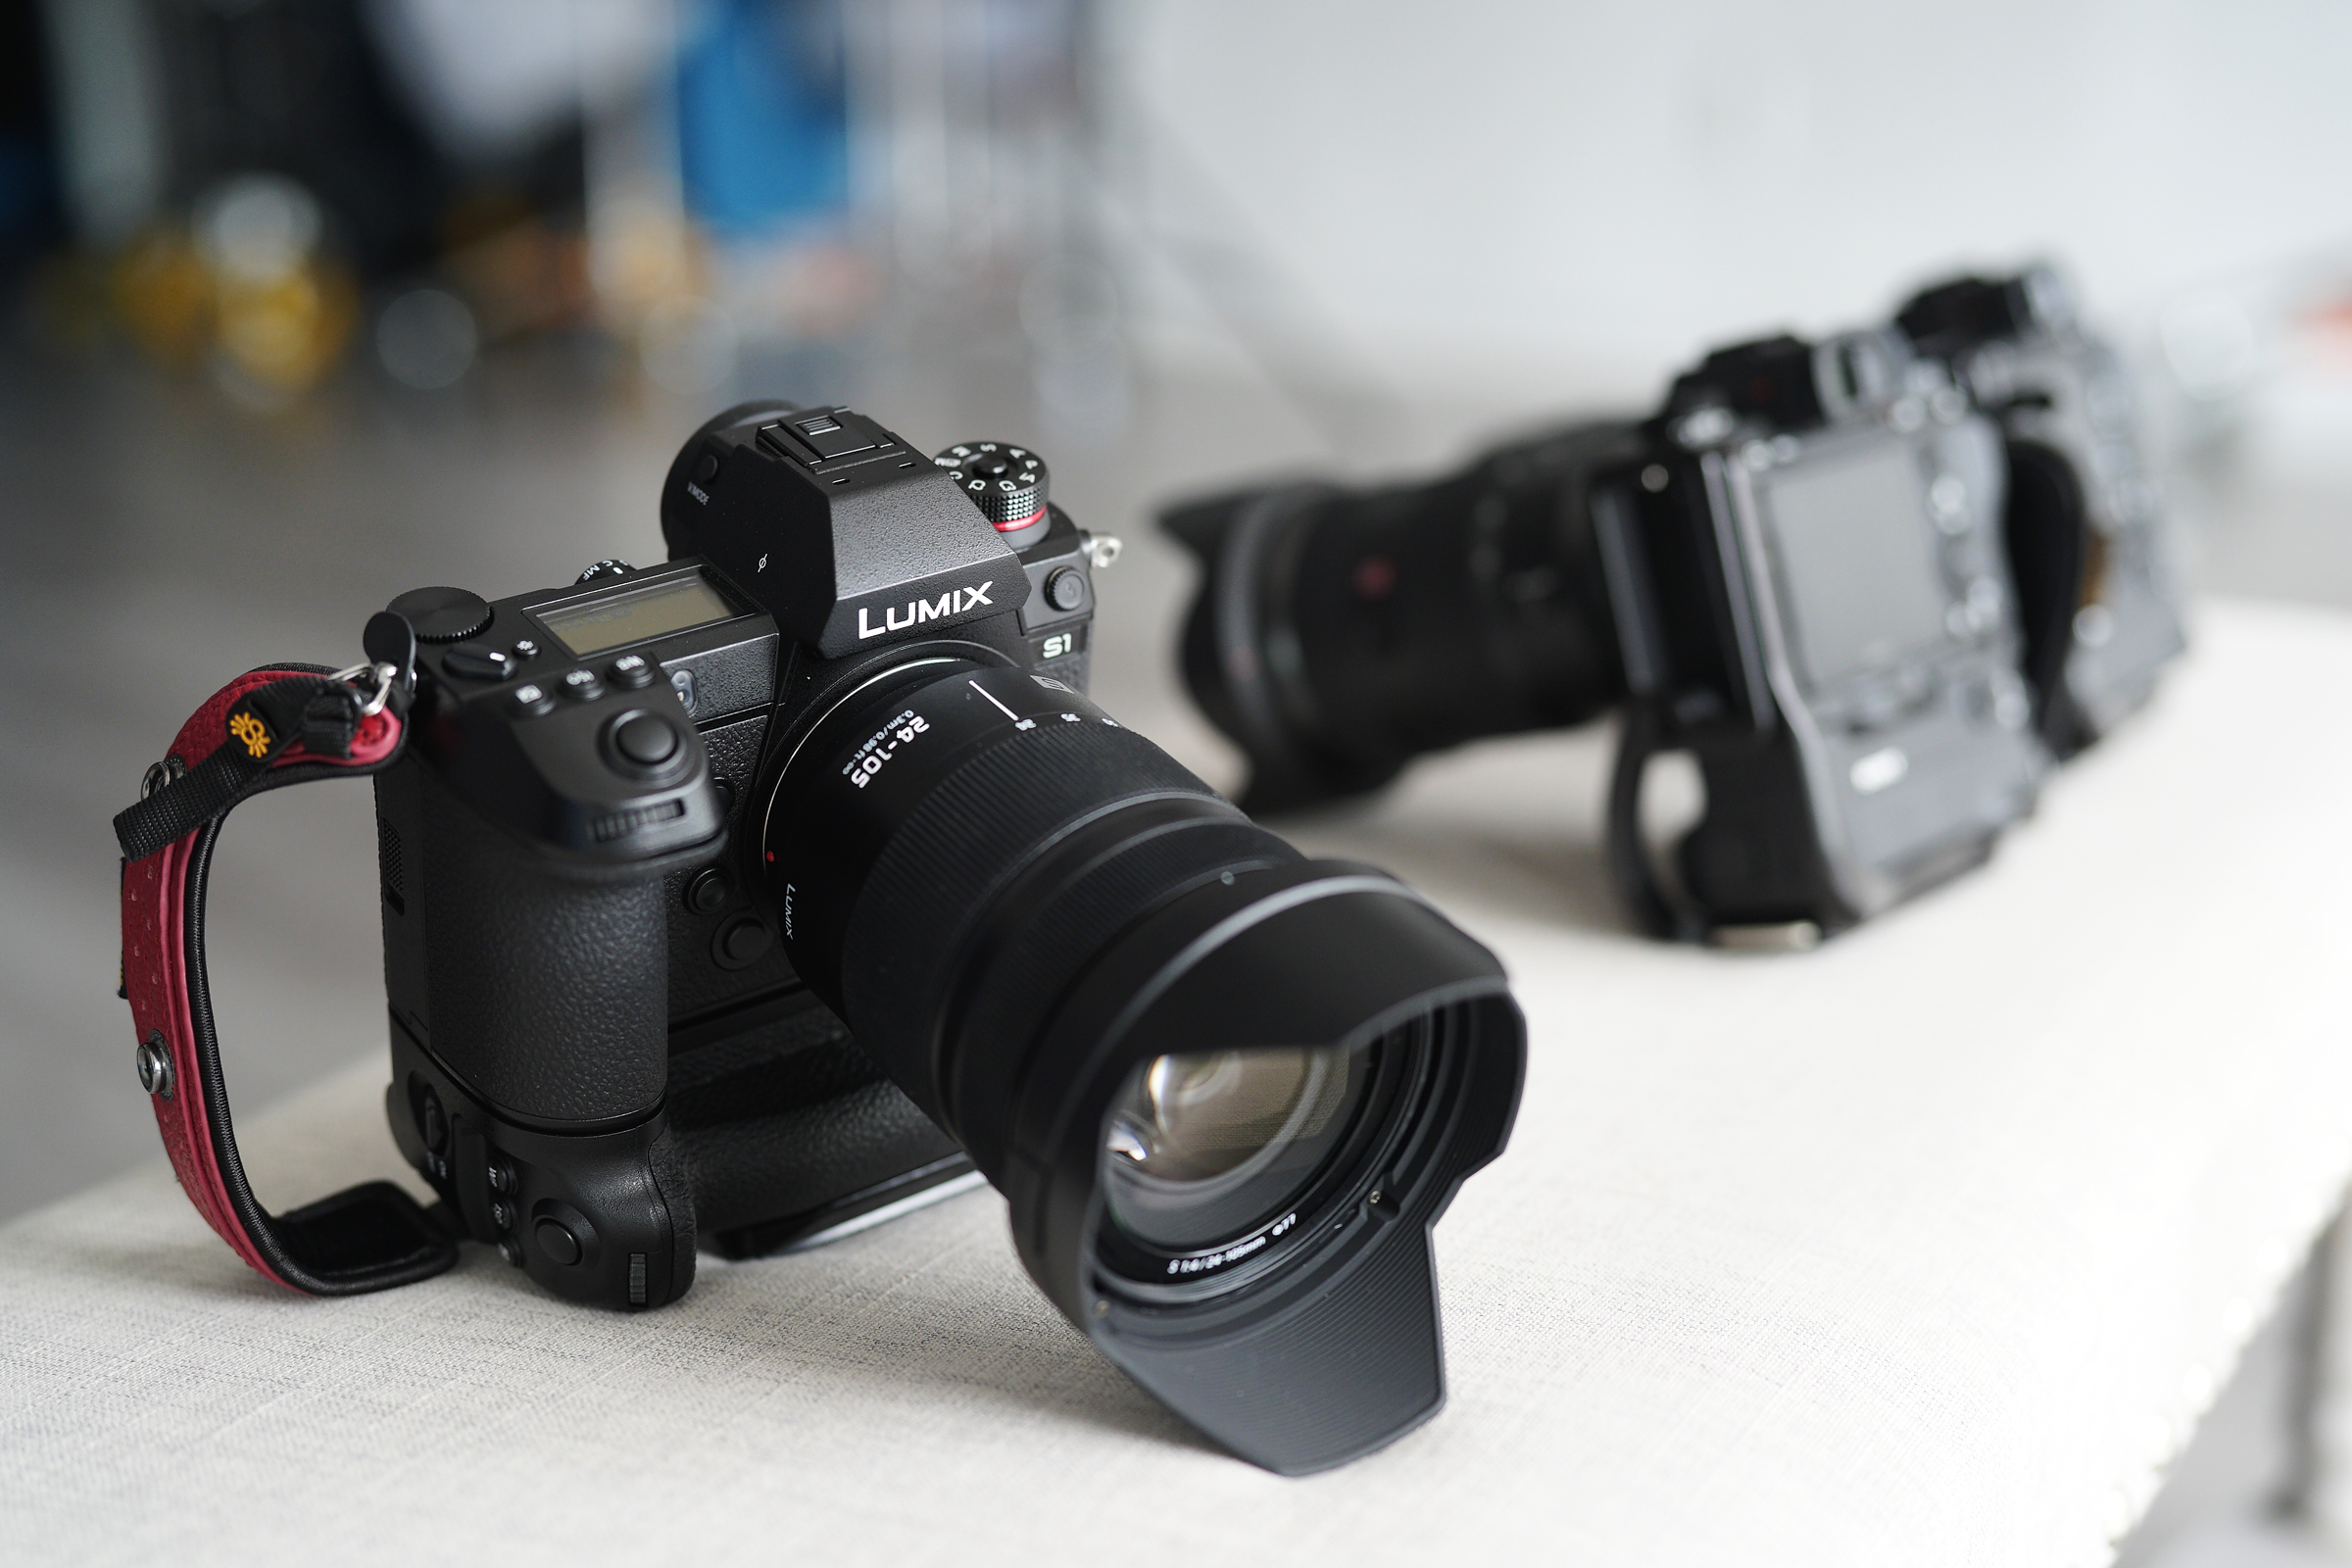 Panasonic Lumix S1 Review from Sony Photographer